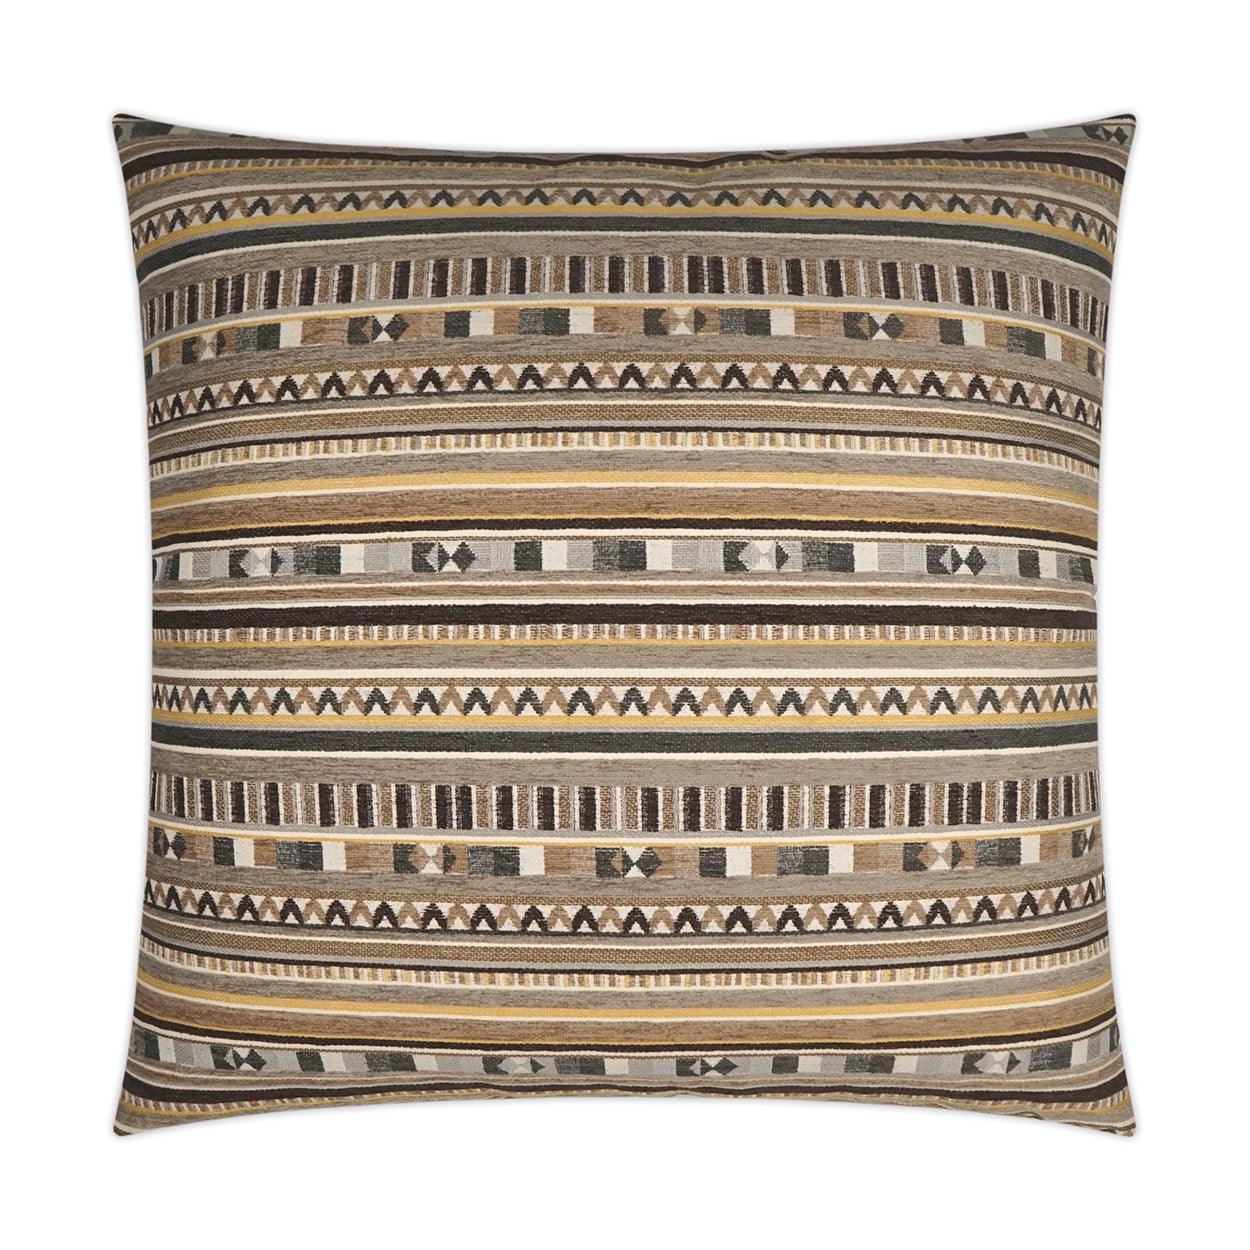 Crossing Sandstone Tan Taupe Brown Large Throw Pillow With Insert - Uptown Sebastian